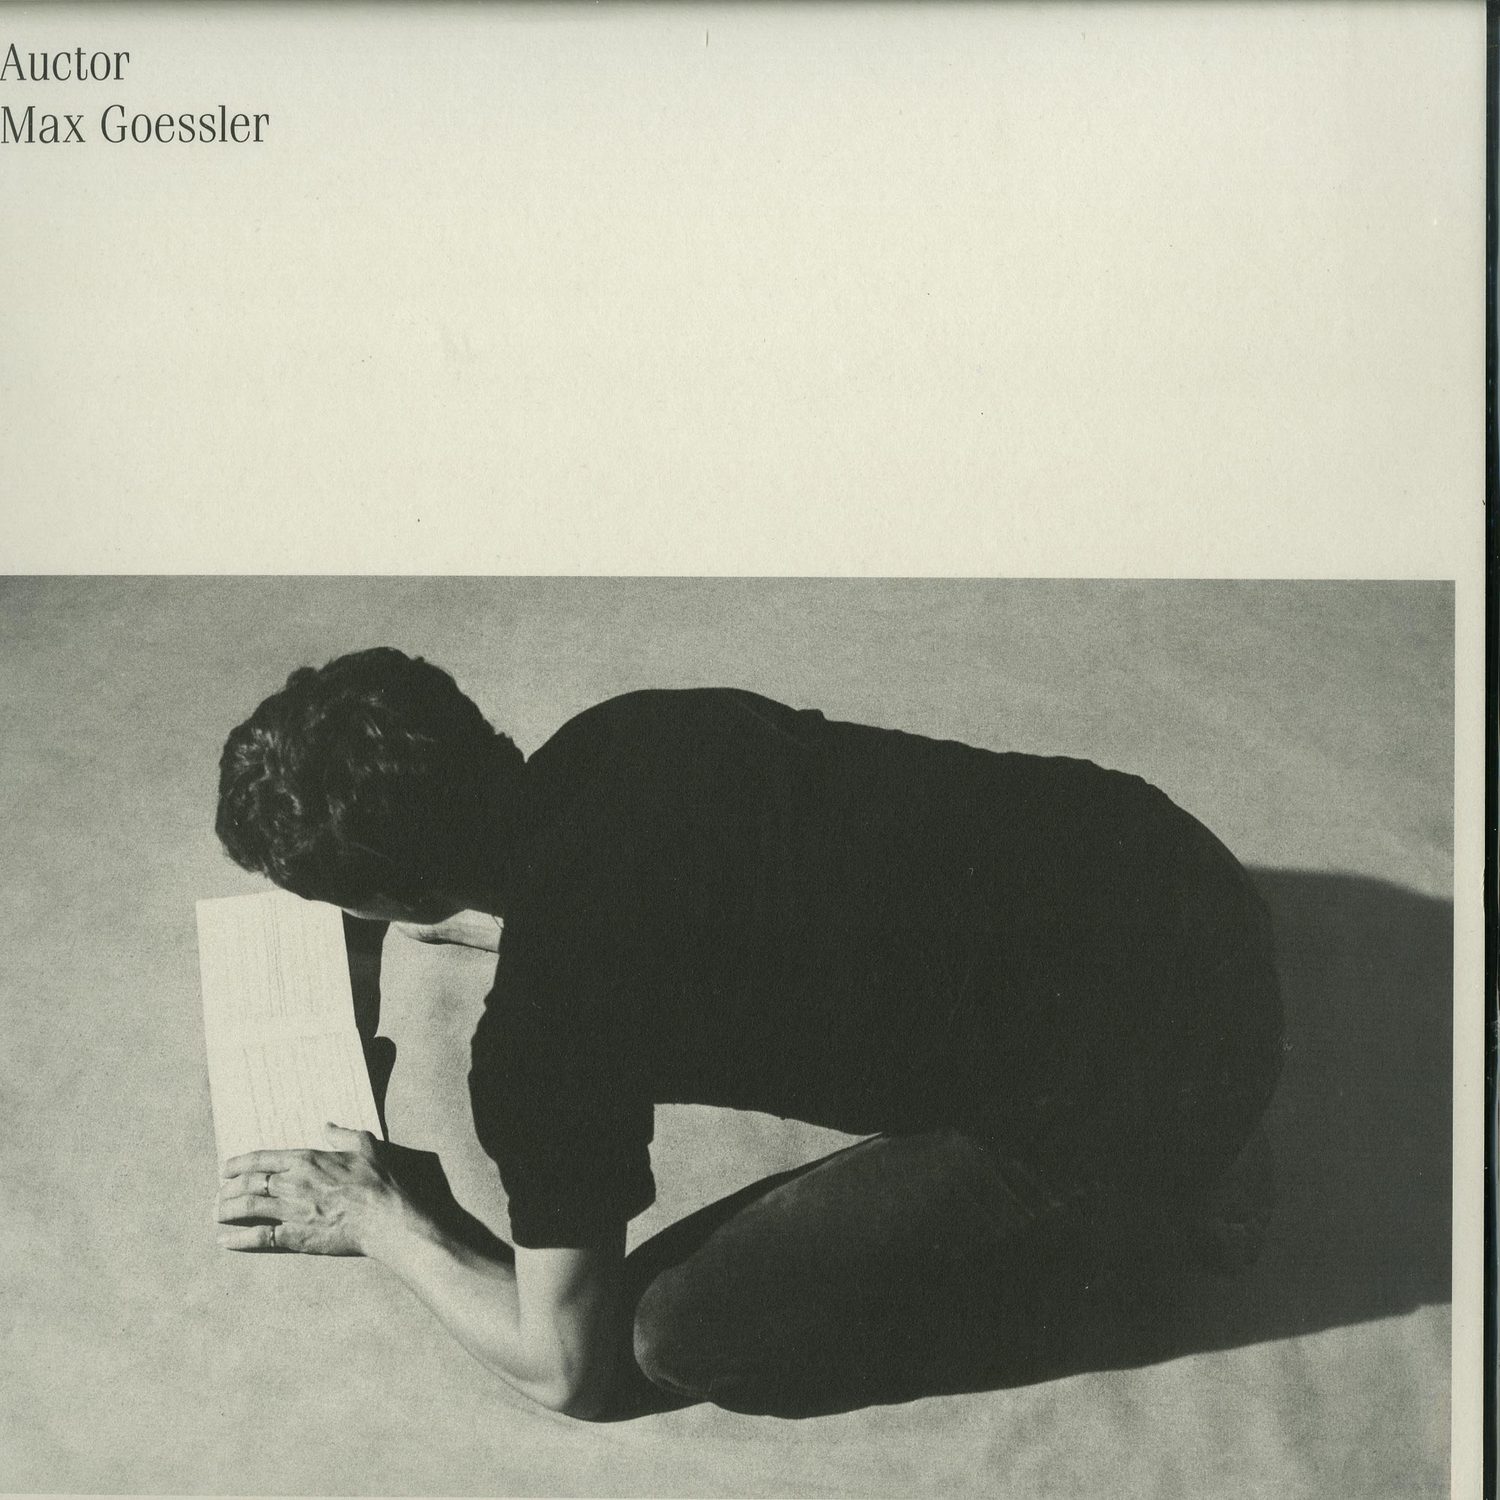 Max Goessler - AUCTOR EP